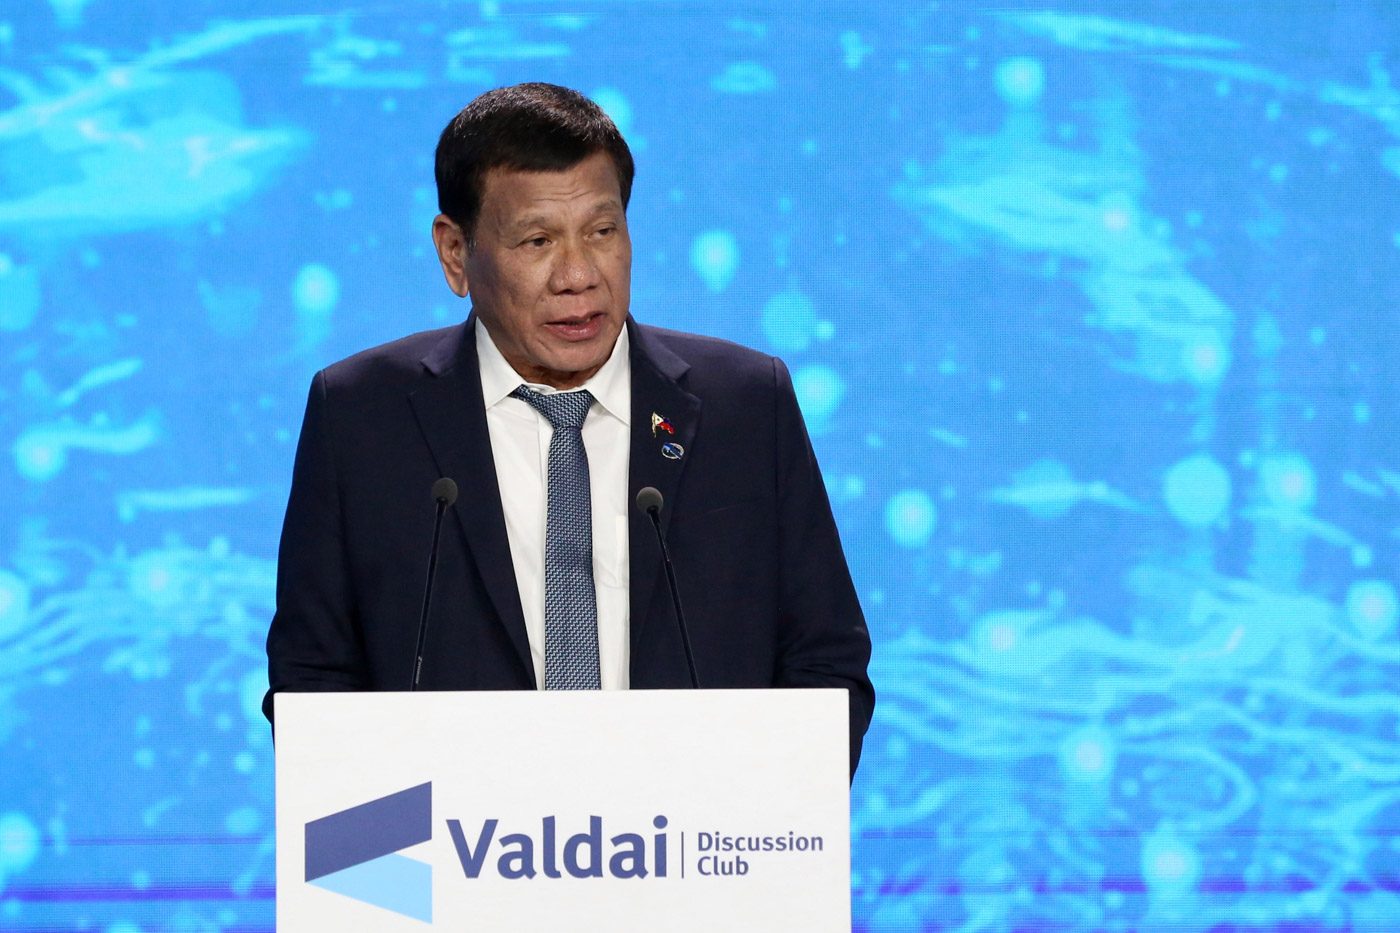 Duterte rants about ‘U.S. and the West’ at Russian forum